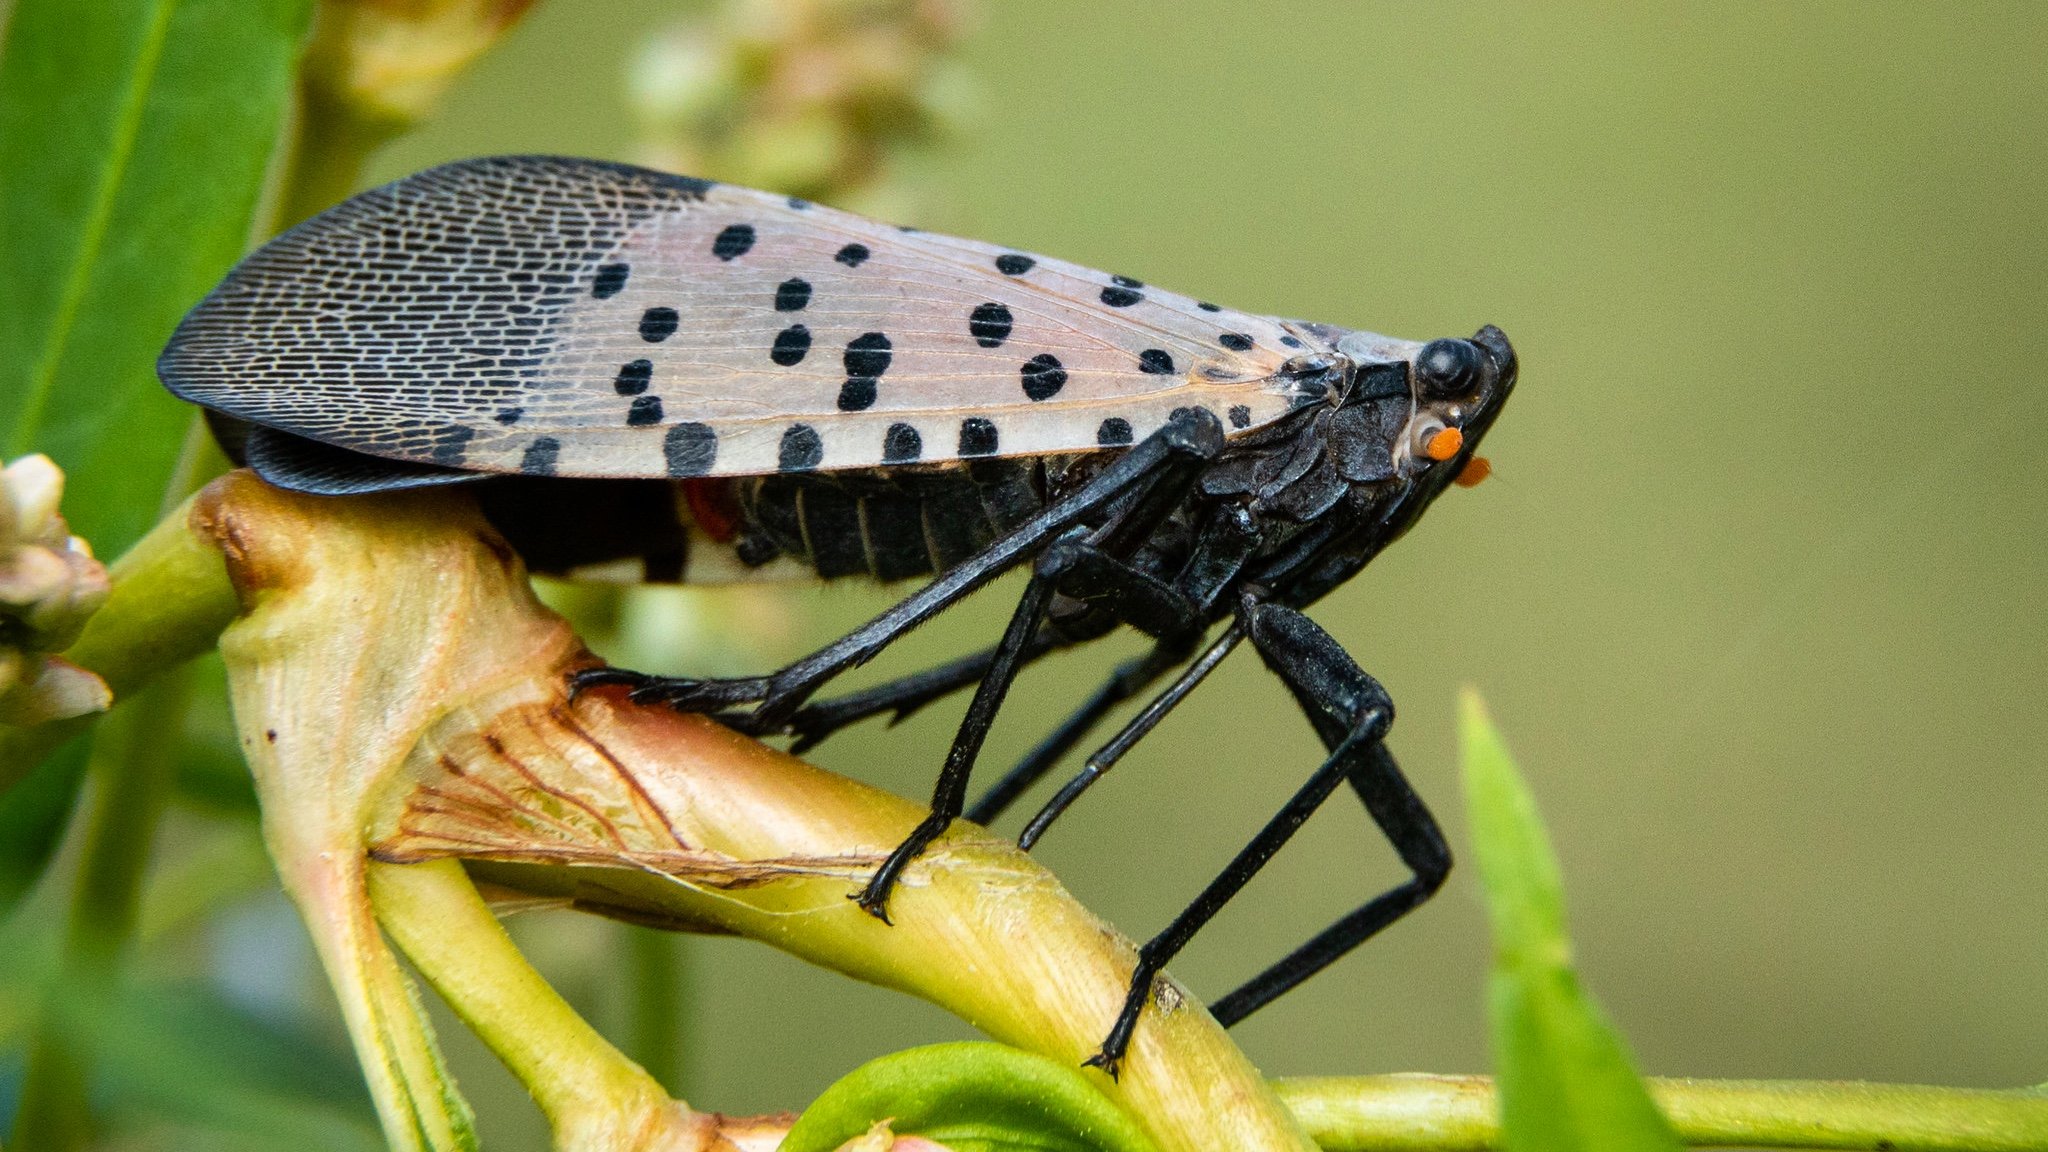 Be on the lookout for the spotted lanternfly, which threatens a host of fruit trees and plants. (Chesapeake Bay Program / Flickr)